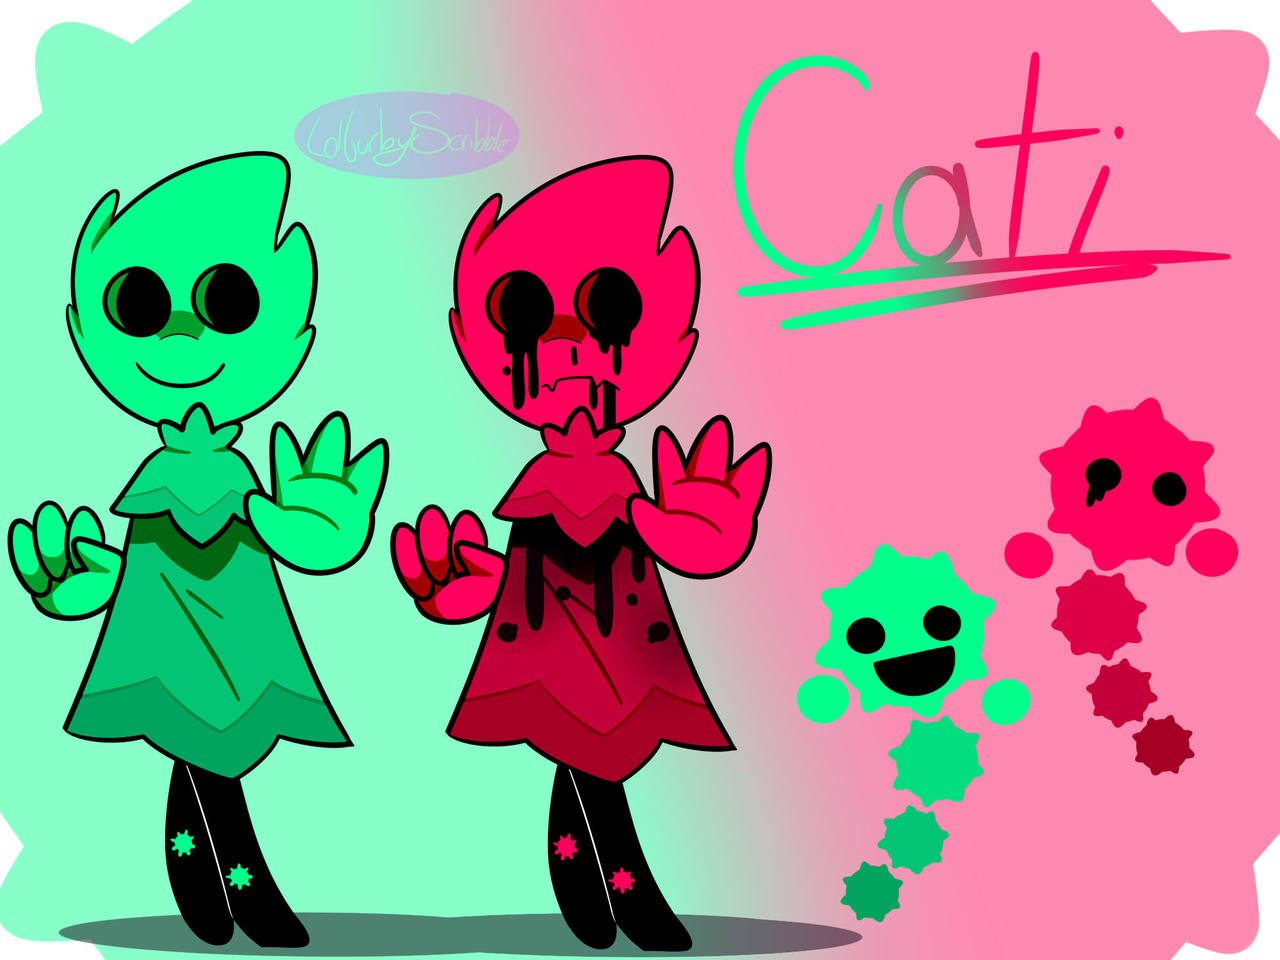 Just Shapes and Beats: Cati by Lolfurbyscribble on DeviantArt